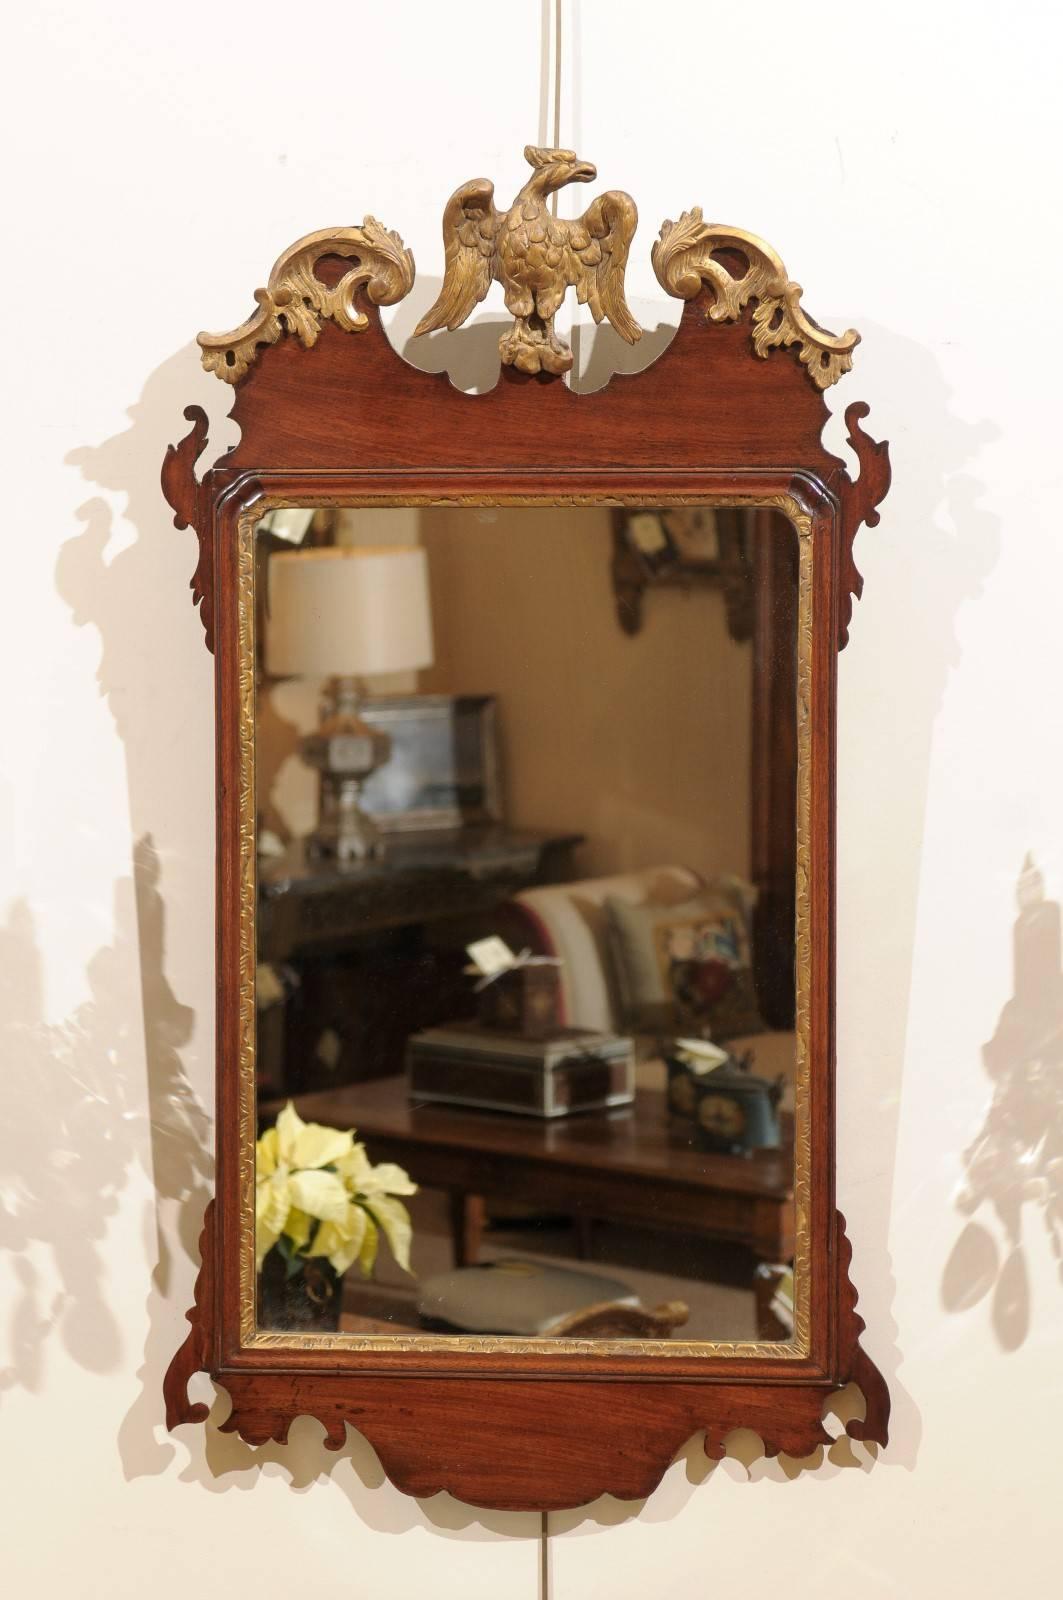 English Chippendale mirror in mahogany with eagle crest, circa 1750.